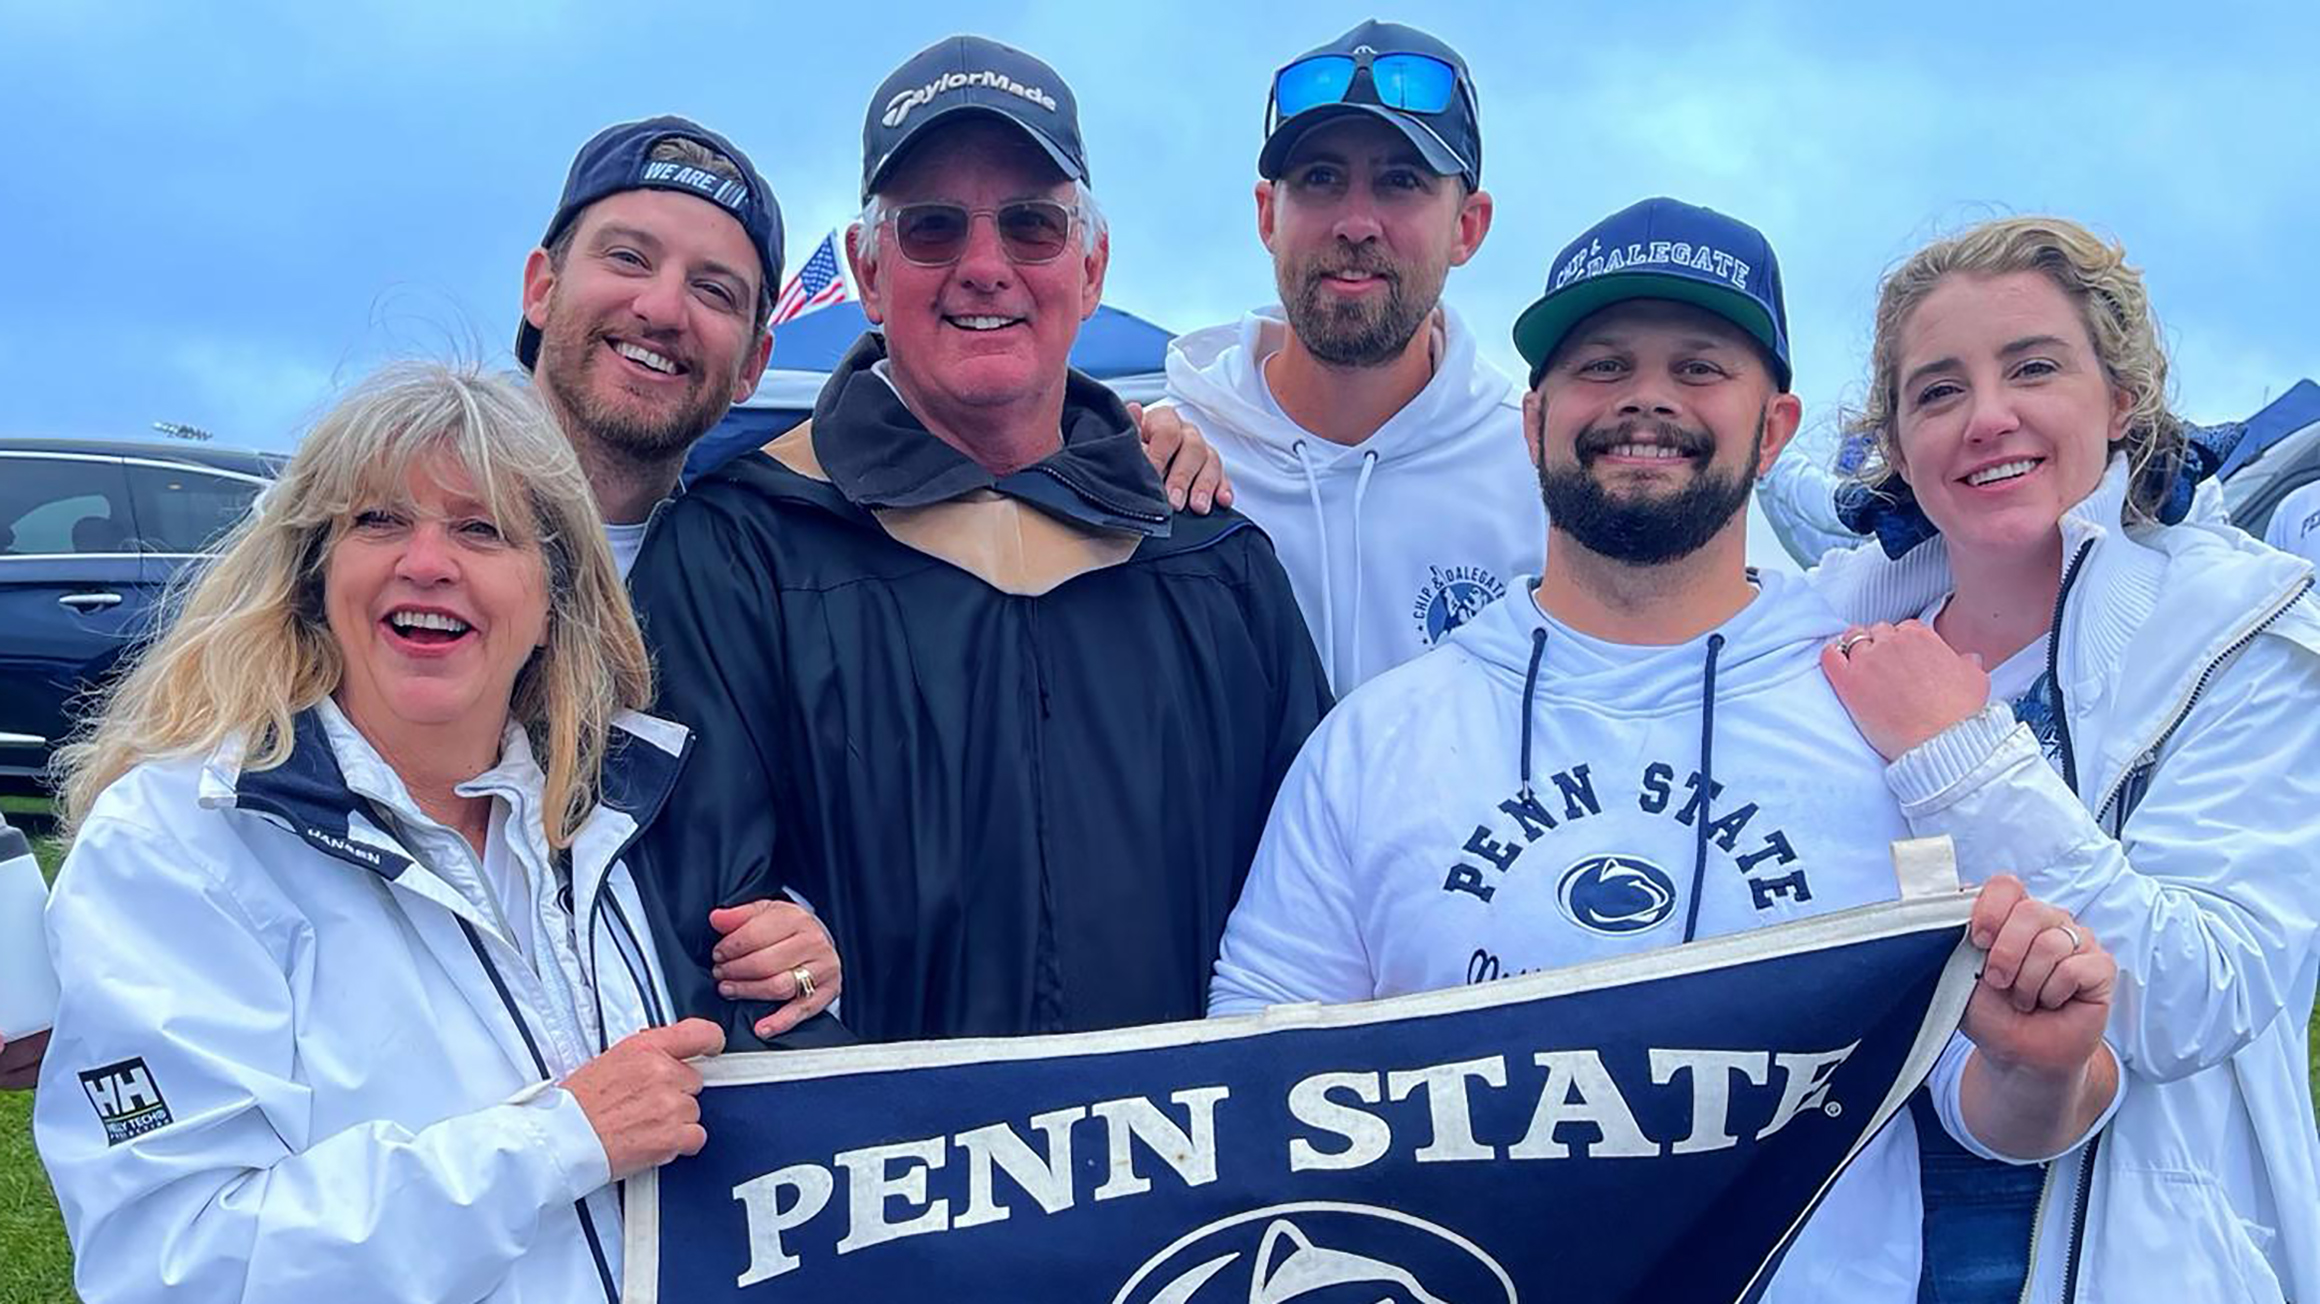 A group of people pose holding a Penn State banner.